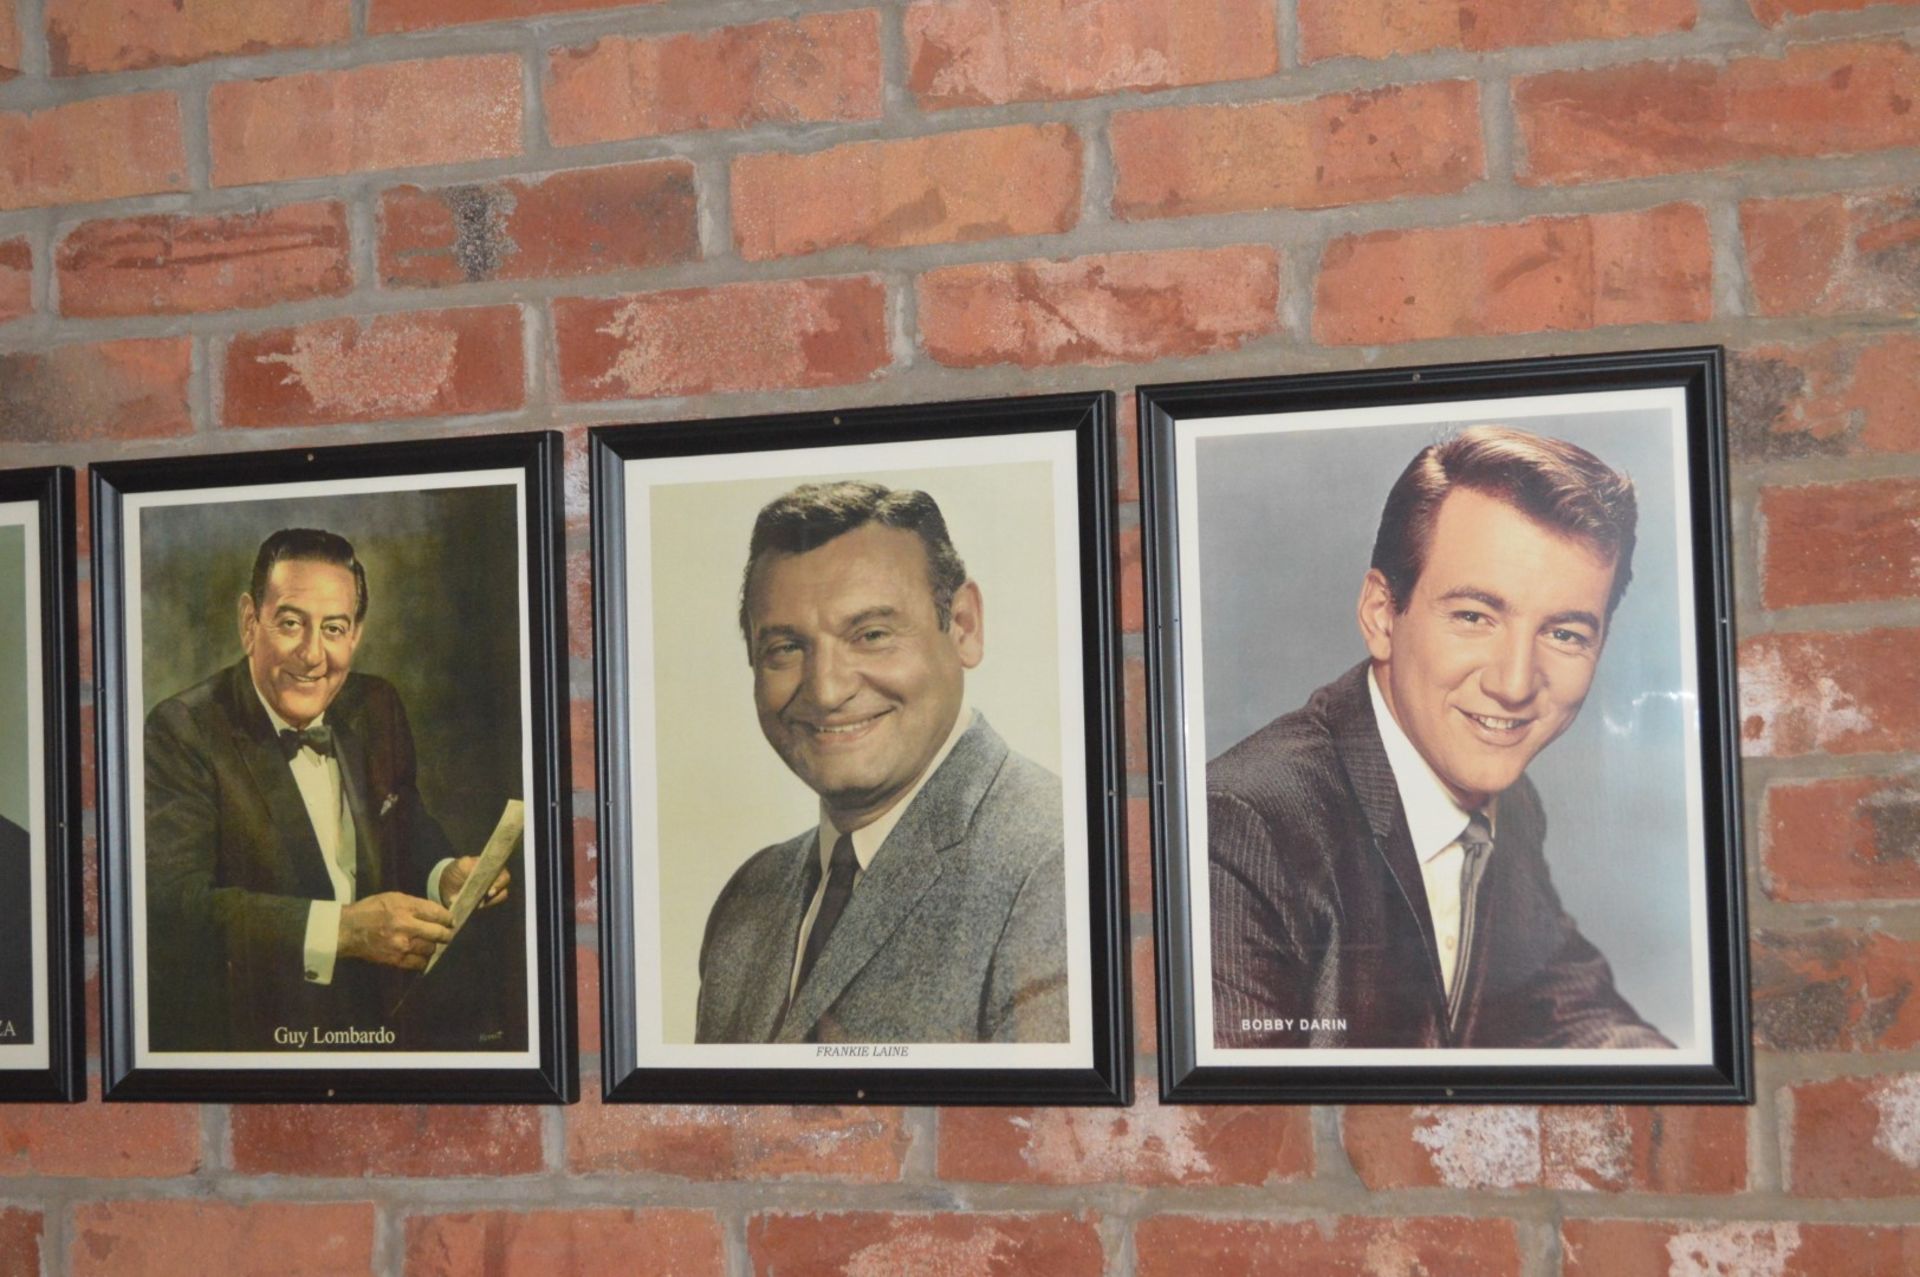 8 x Framed Pictures of Famous American / Italian Celebrities - Includes Dean Martin, Rossano Brazzi, - Image 5 of 5